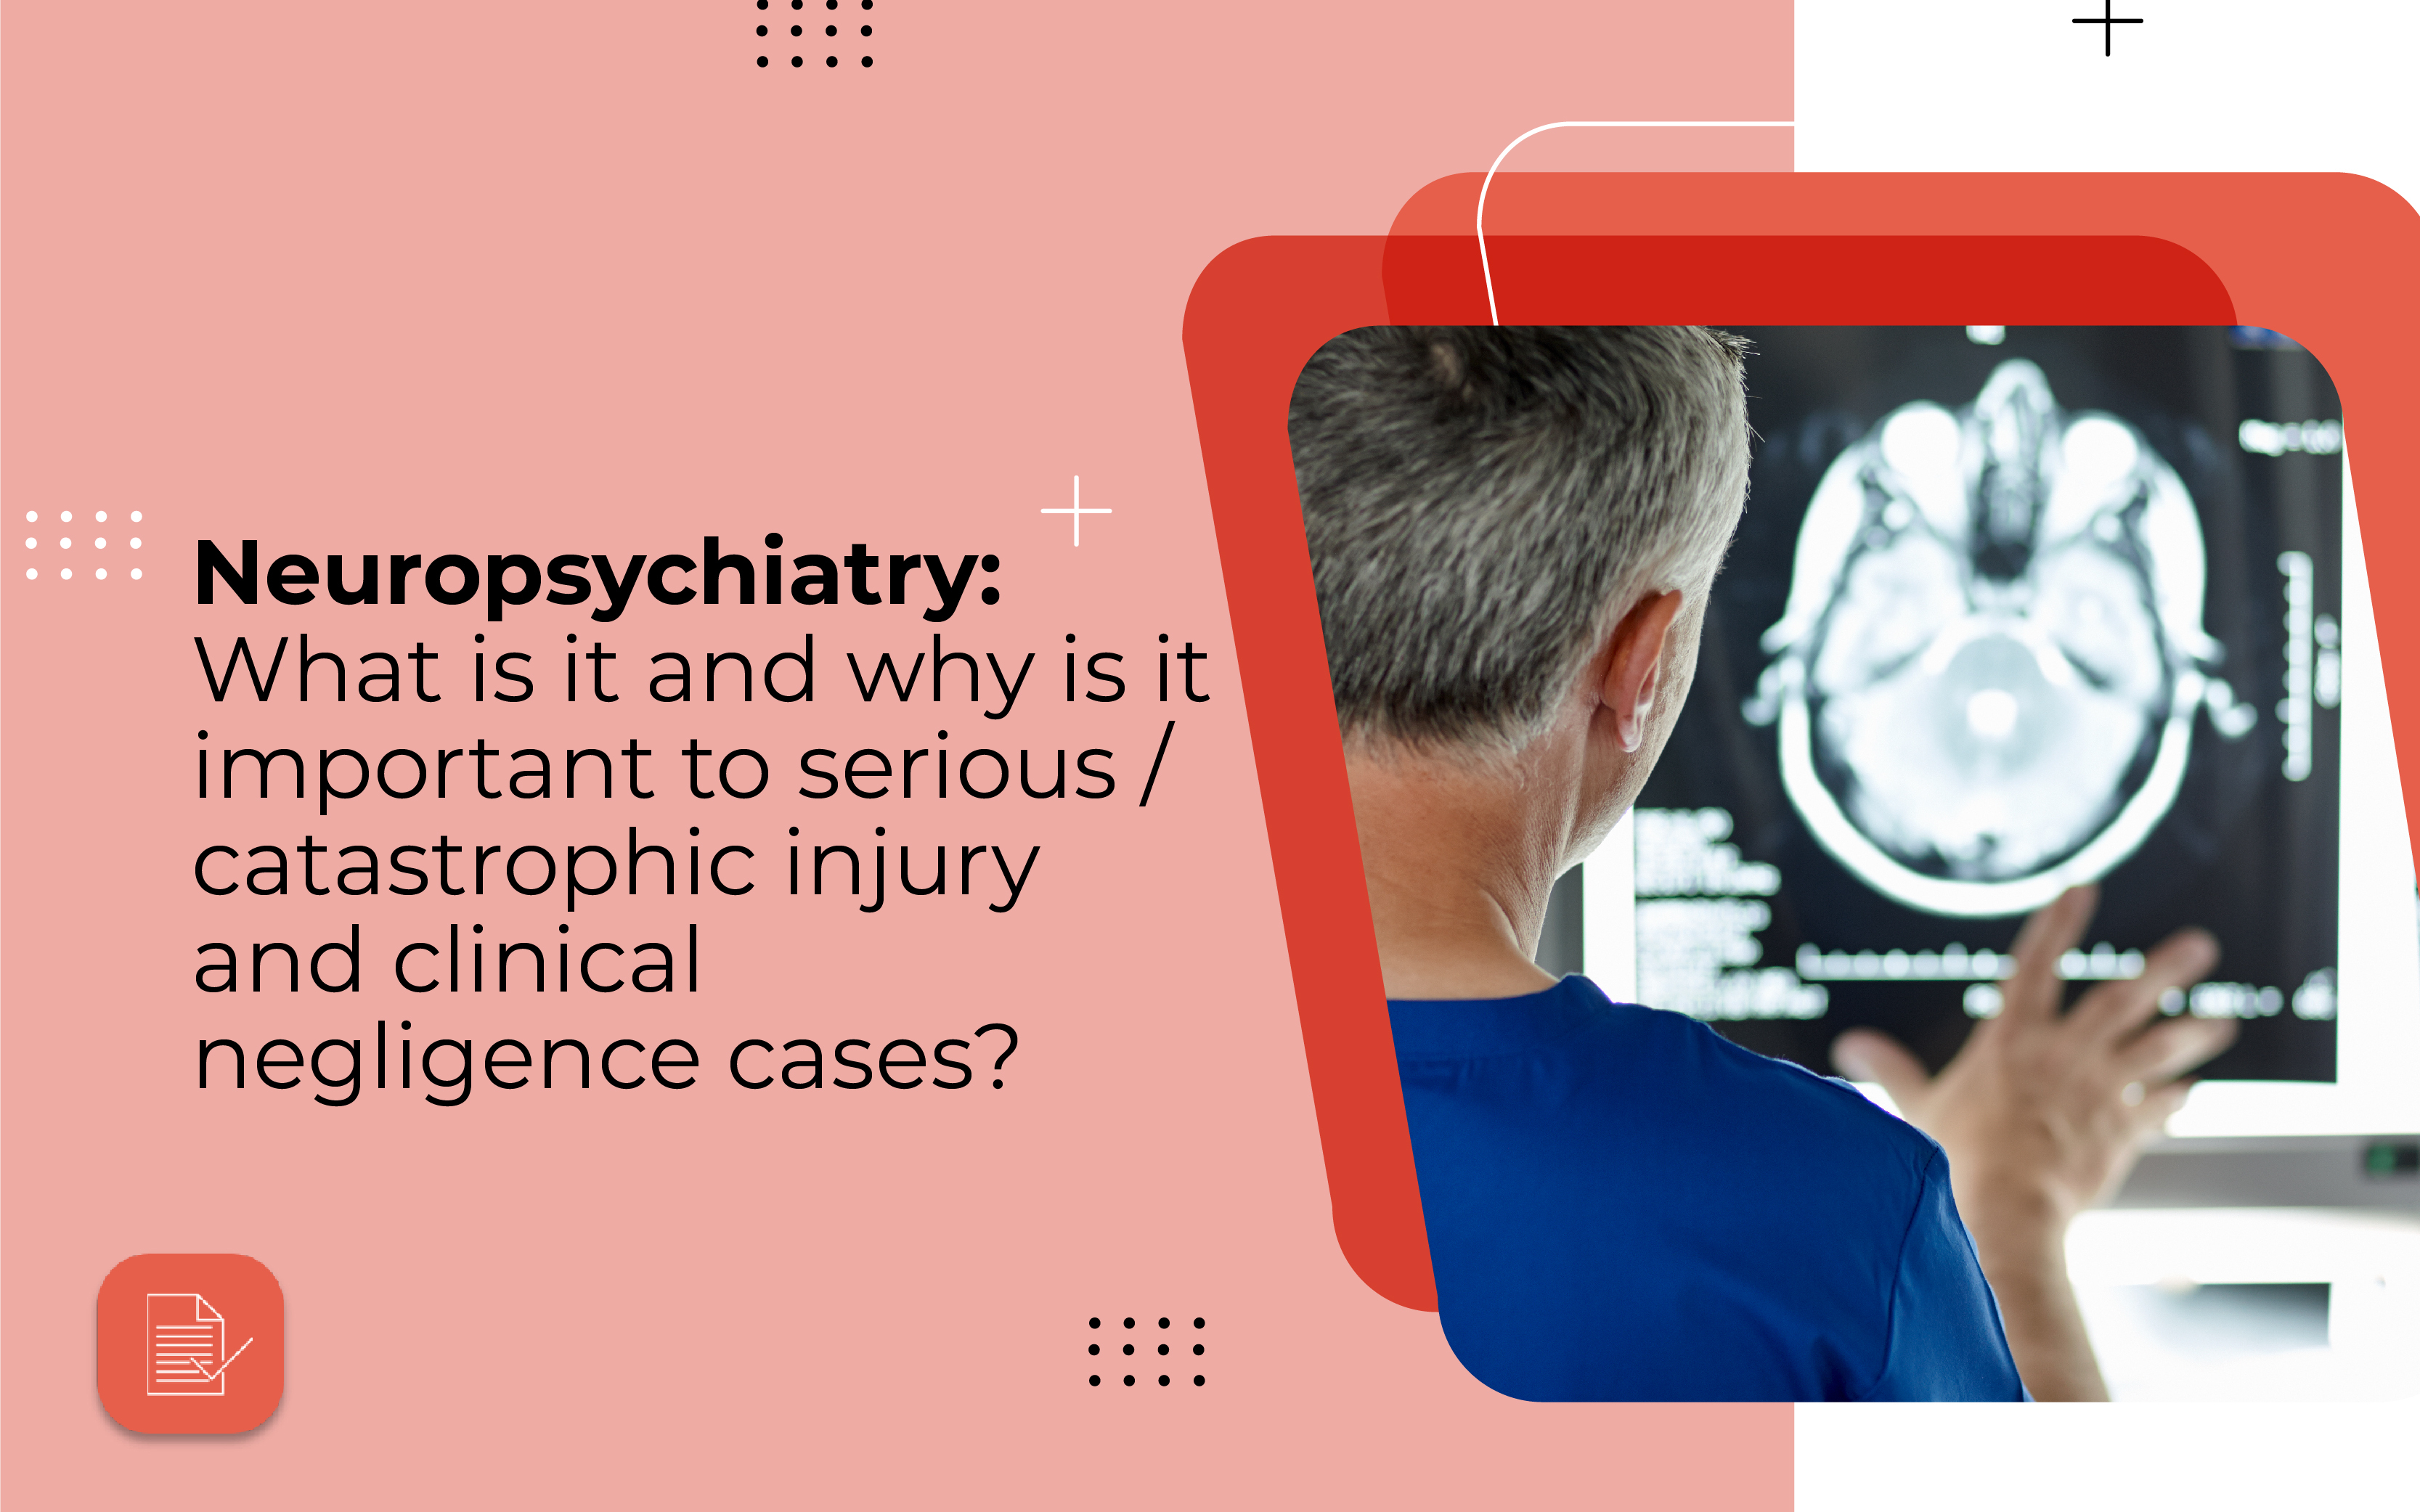 Neuropsychiatry: What is it and why is it important to serious injury, catastrophic injury and clinical negligence cases?